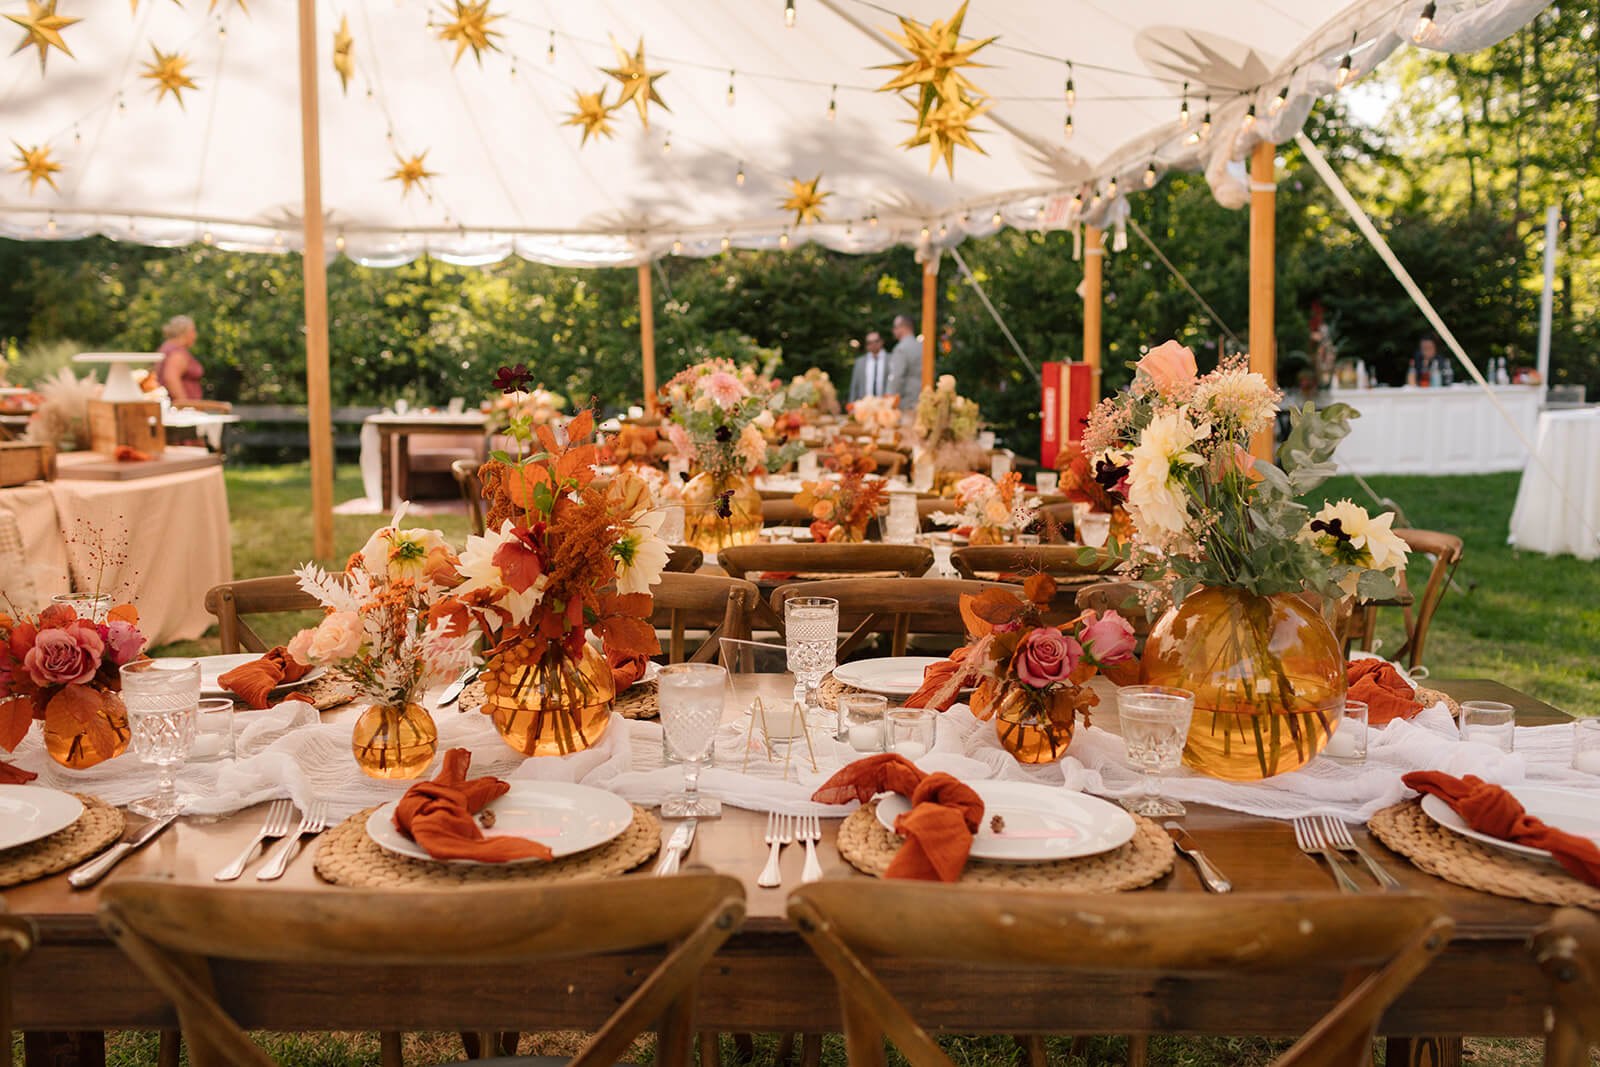 Warmed toned color palette for this tented wedding table setting